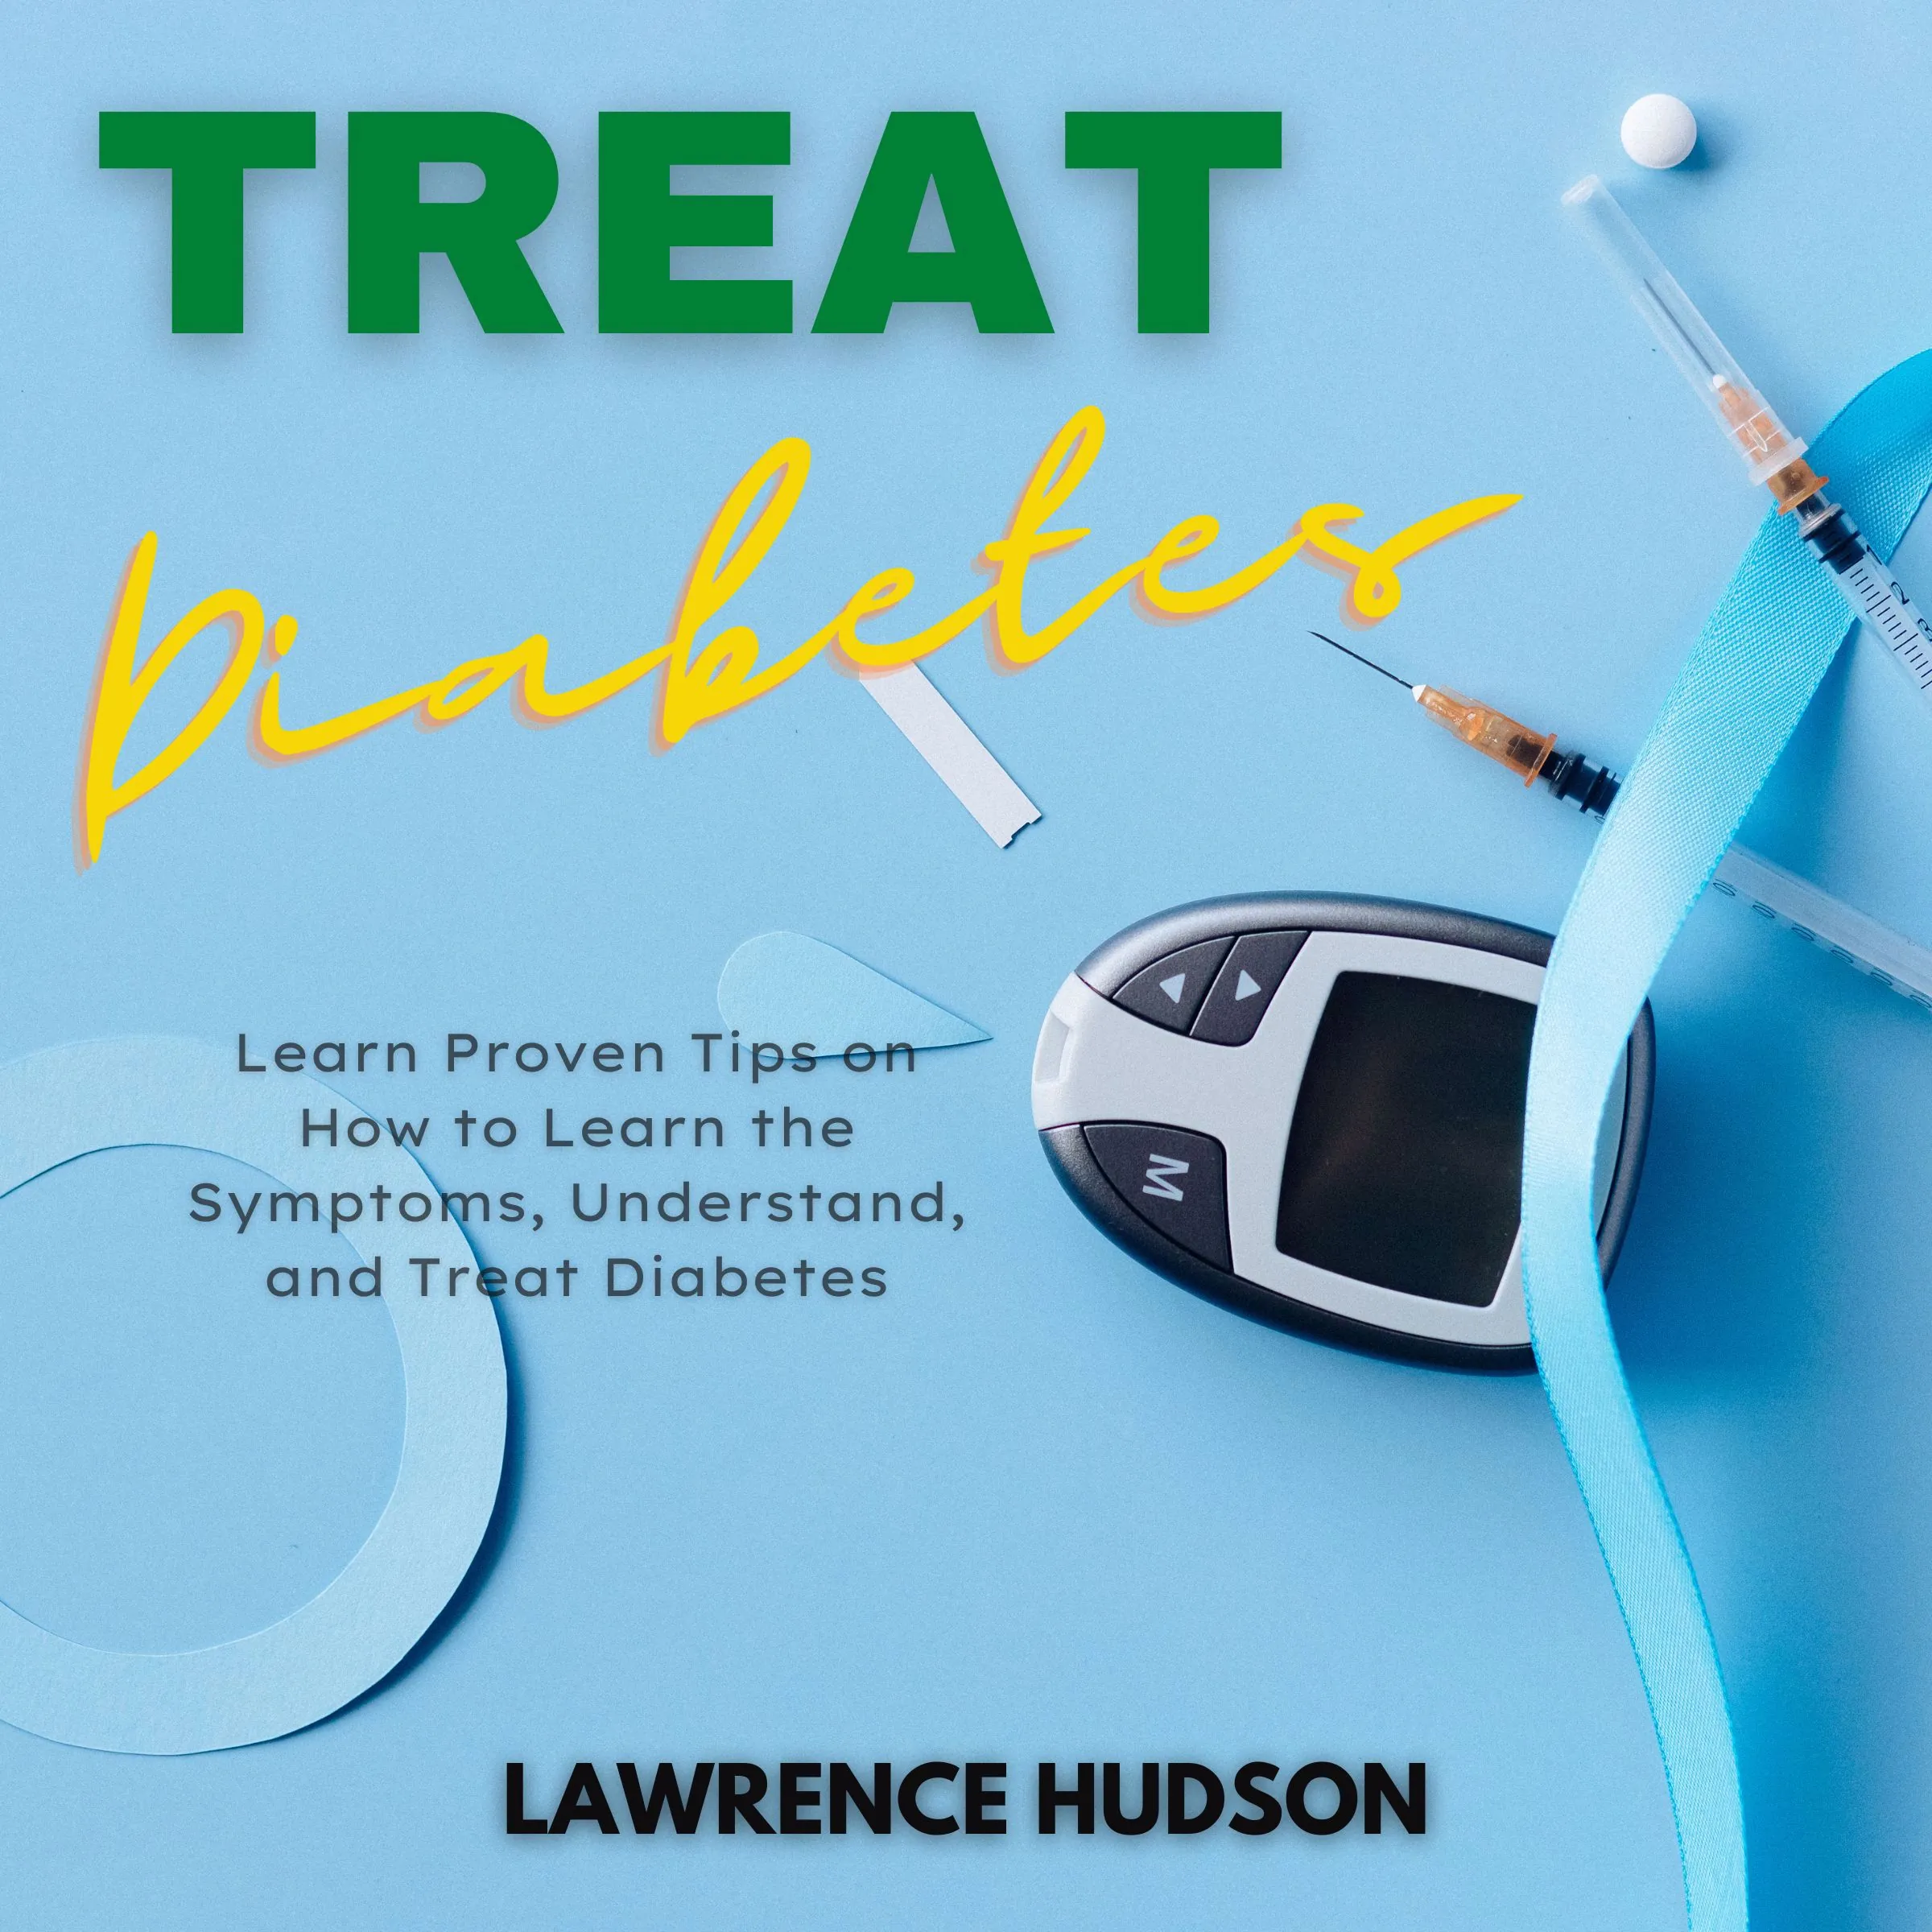 Treat Diabetes Audiobook by Lawrence Hudson